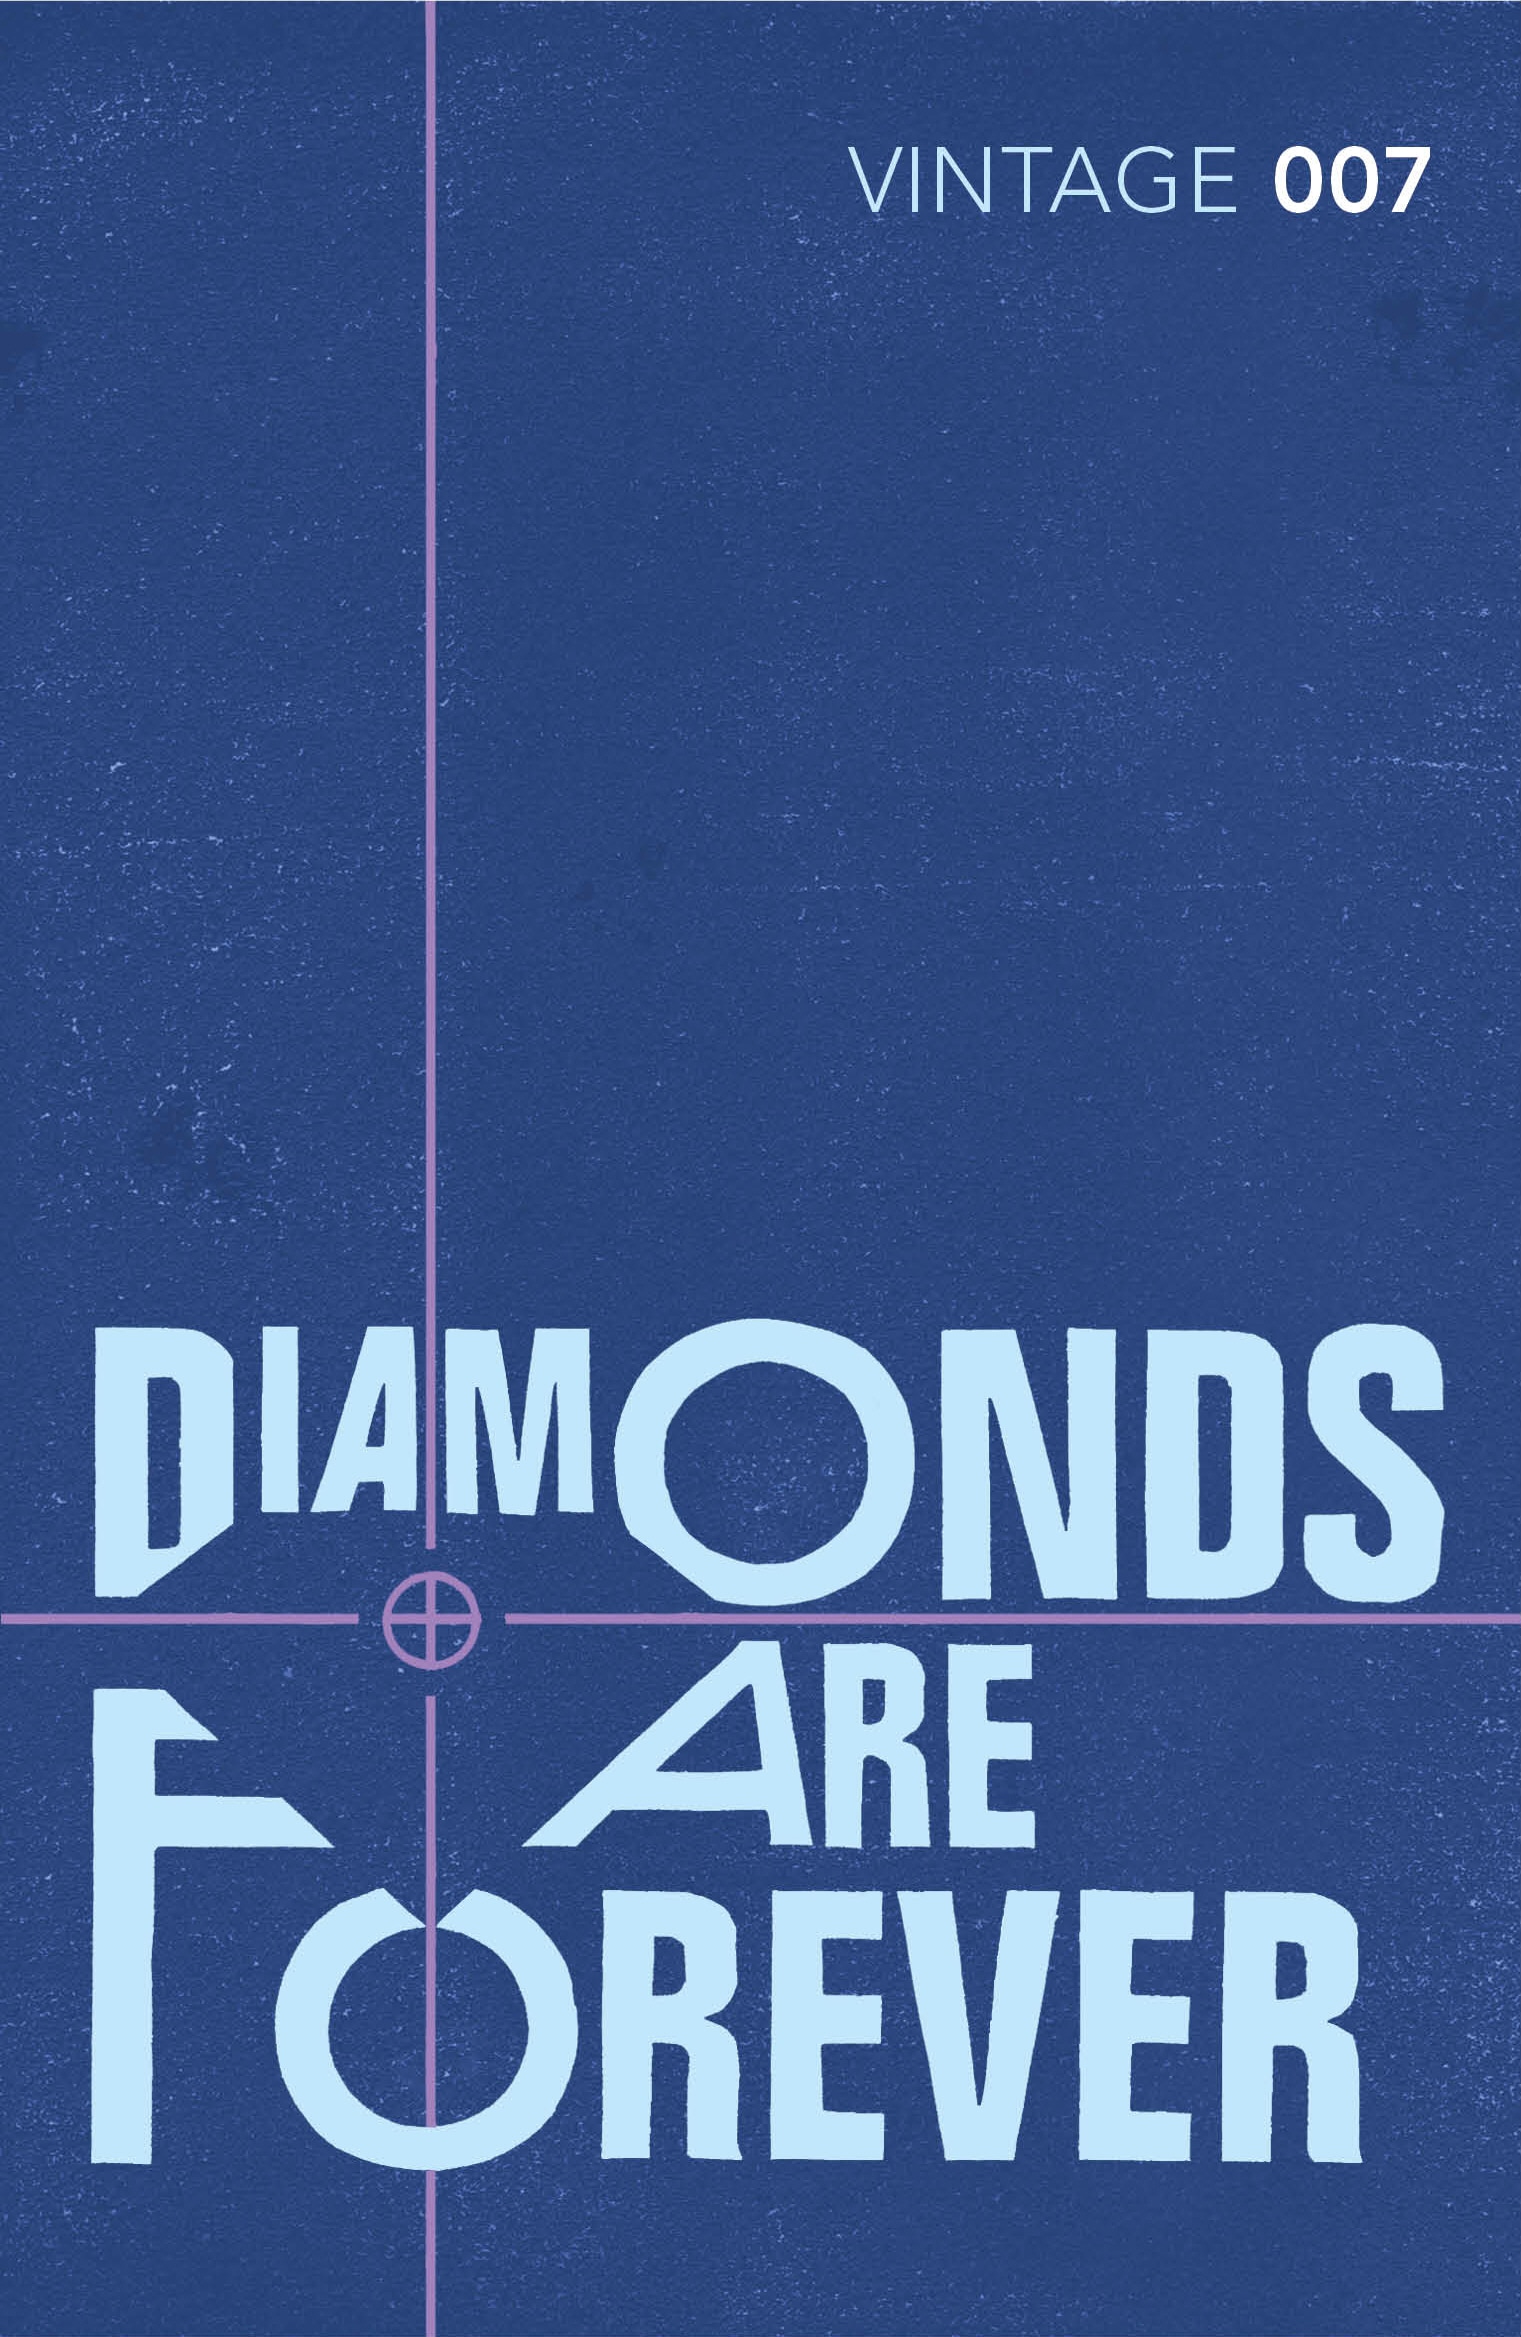 Book “Diamonds are Forever” by Ian Fleming, Giles Foden — September 6, 2012